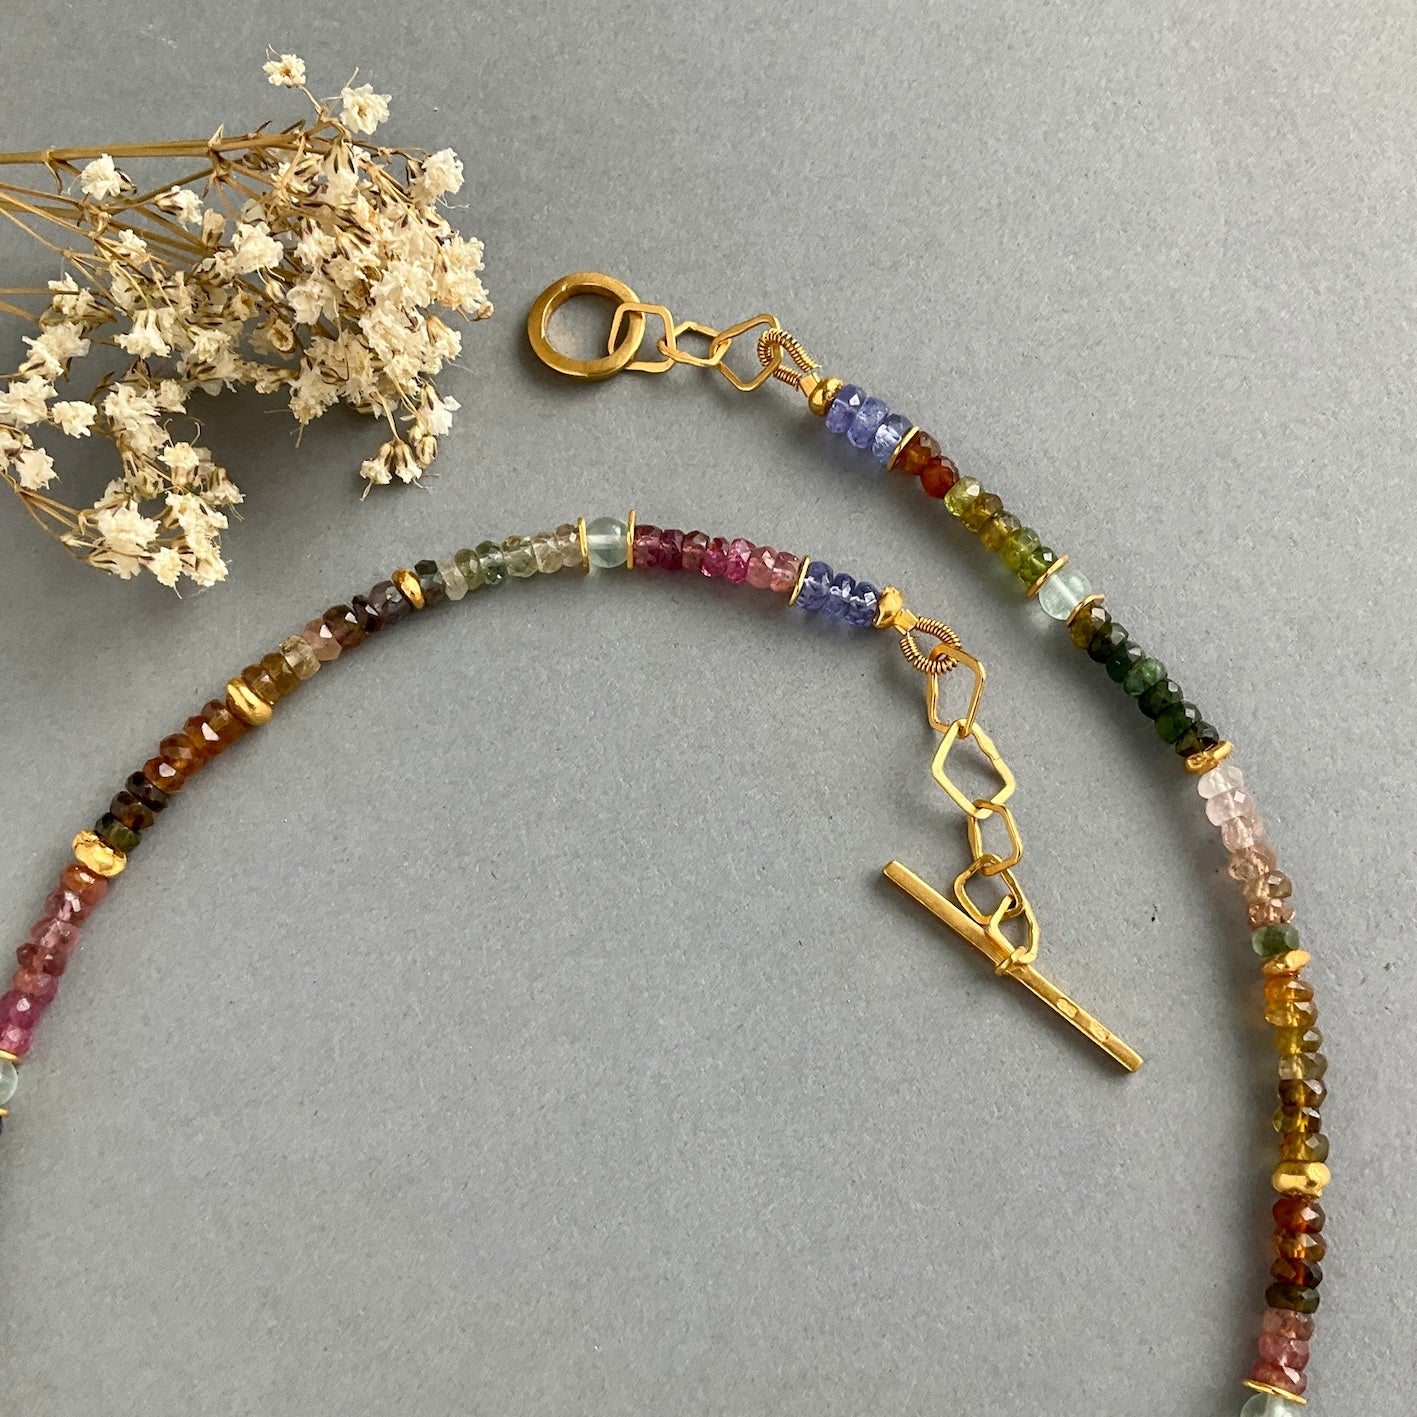 INDIAN SUMMER BEADED GOLD NECKLACE - TOURMALINE